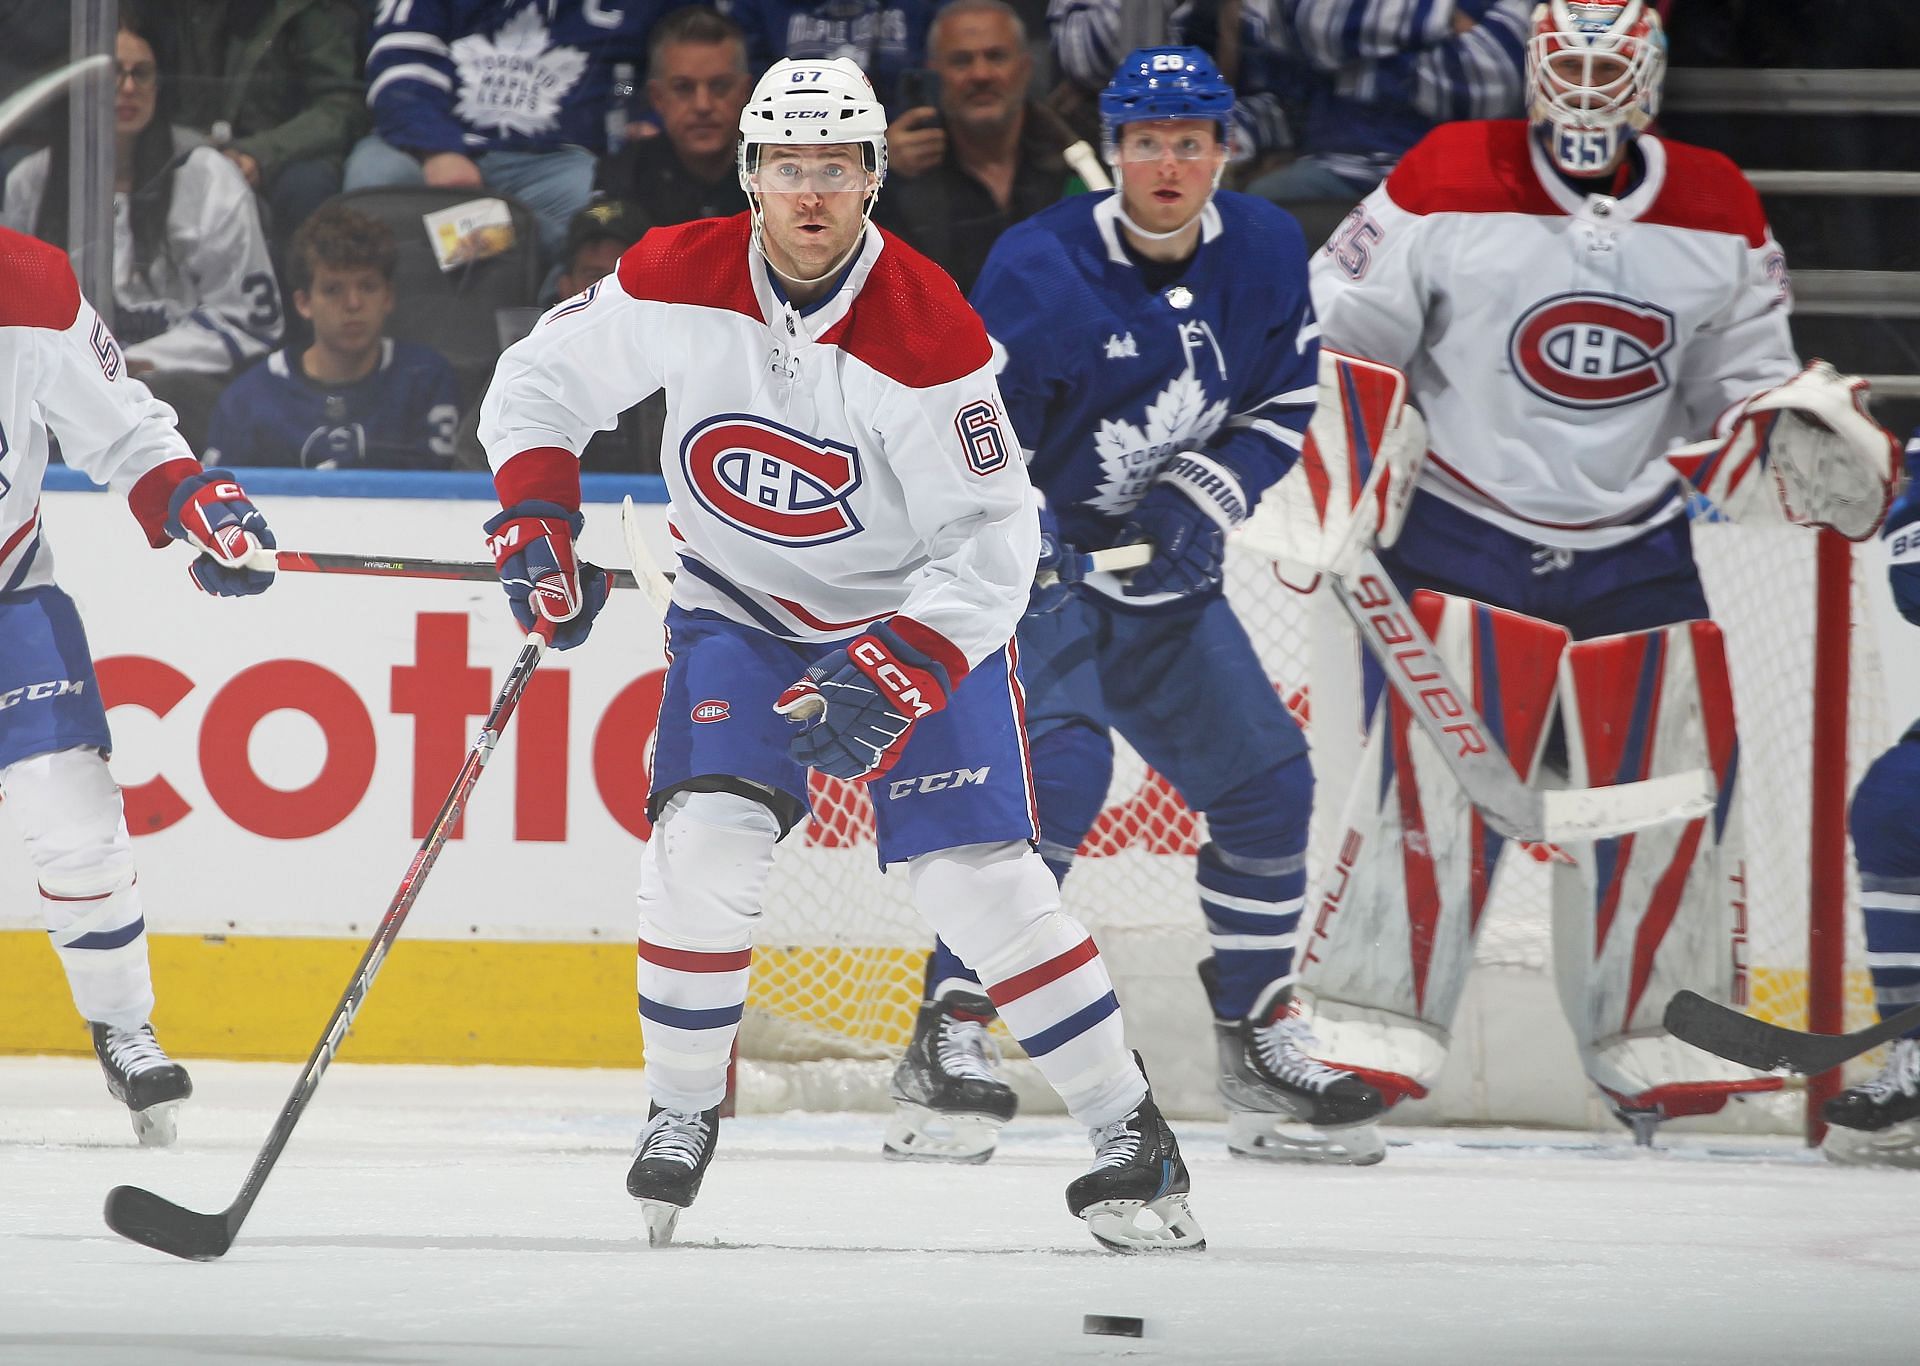 Montreal Canadiens Vs Toronto Maple Leafs Live Streaming Options